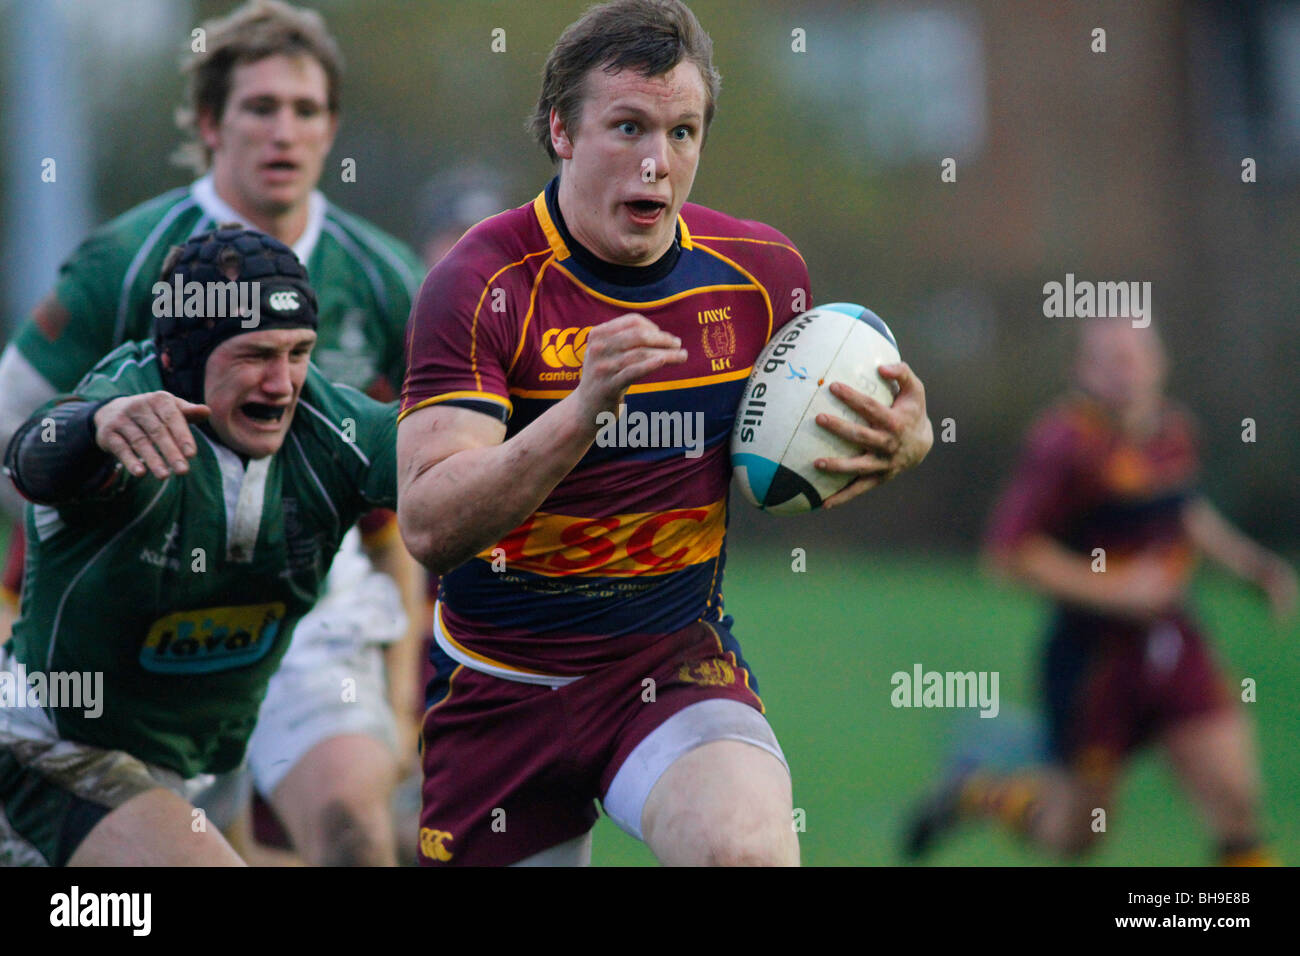 Rugby tackle during a match. Stock Photo